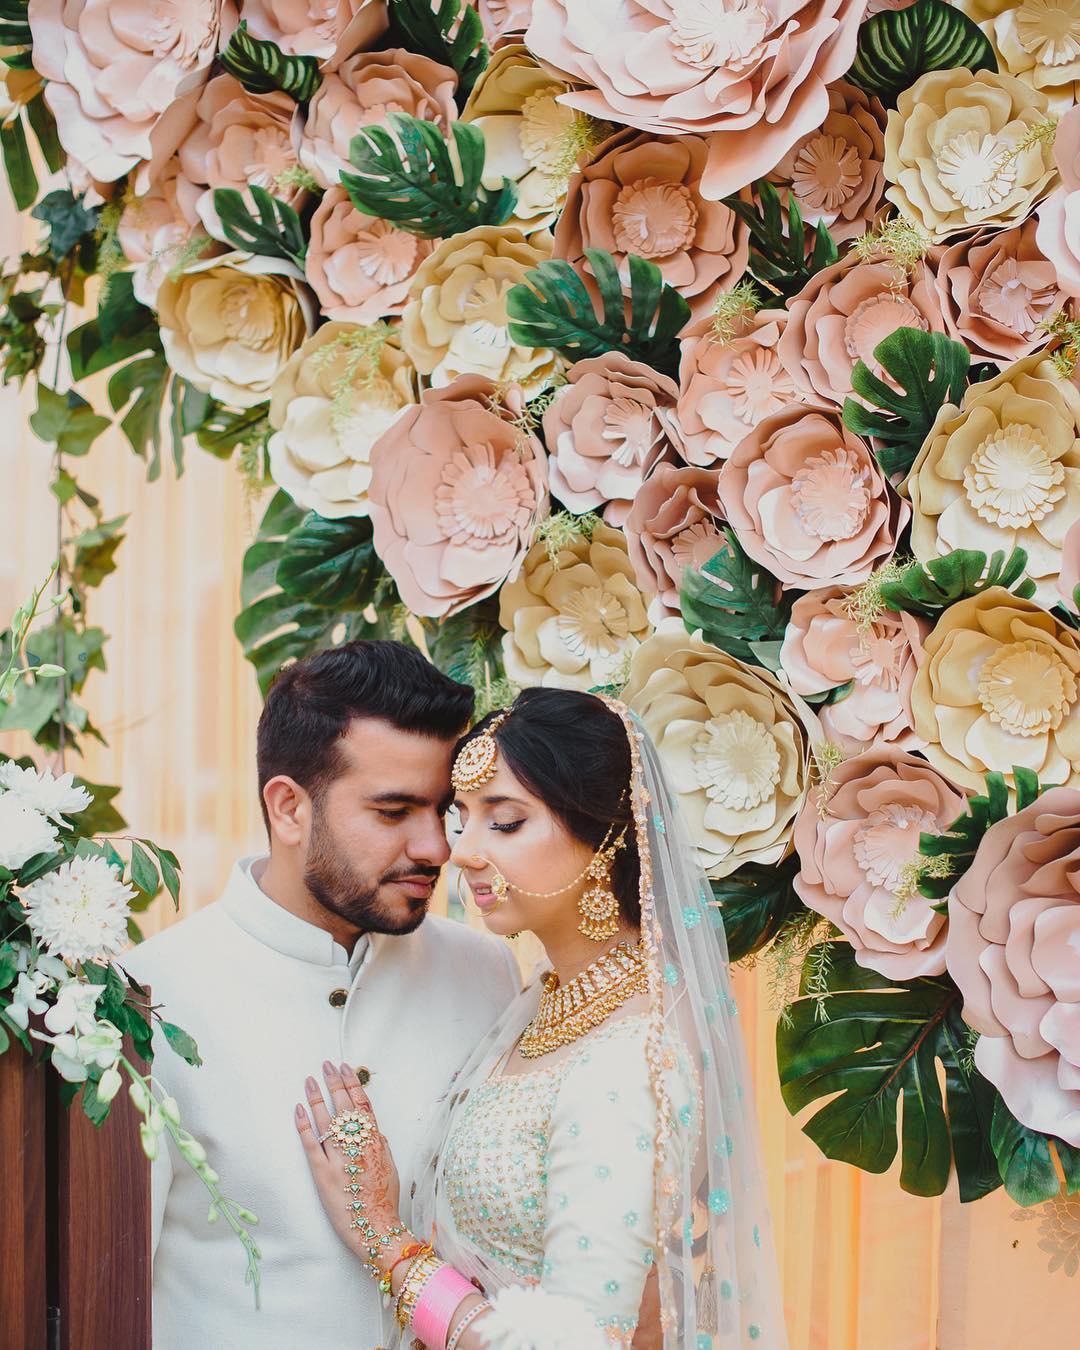 Ultimate Monsoon Wedding Checklist To Rely On For Hassle-Free Planning!